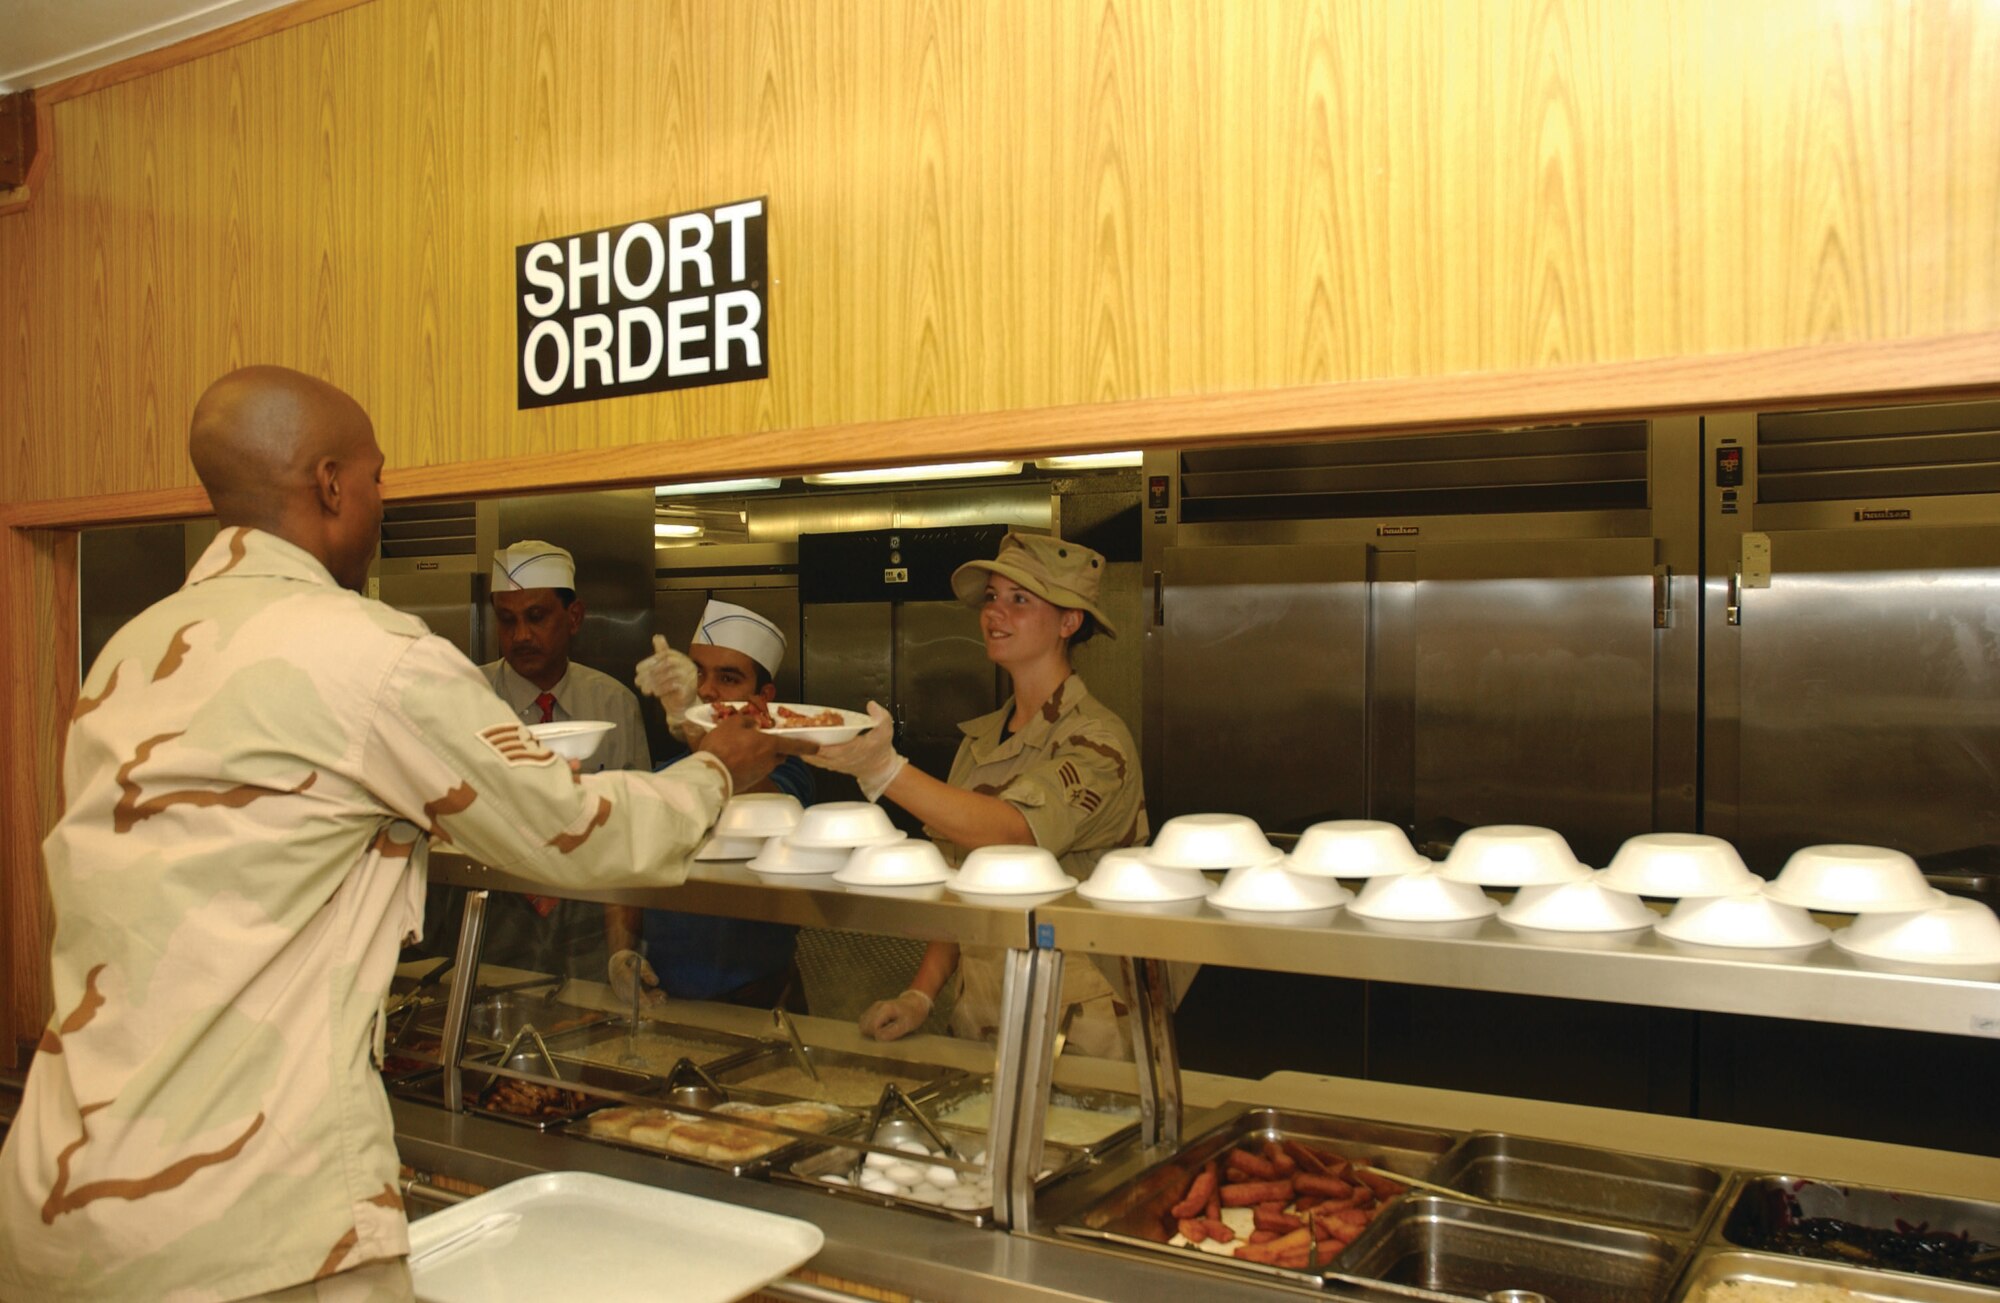 SOUTHWEST ASIA --  Senior Airman Carol Hysell, from the 325th Services Squadron, serves food while deployed to Al Udeid Air Base. (Courtesy photo)